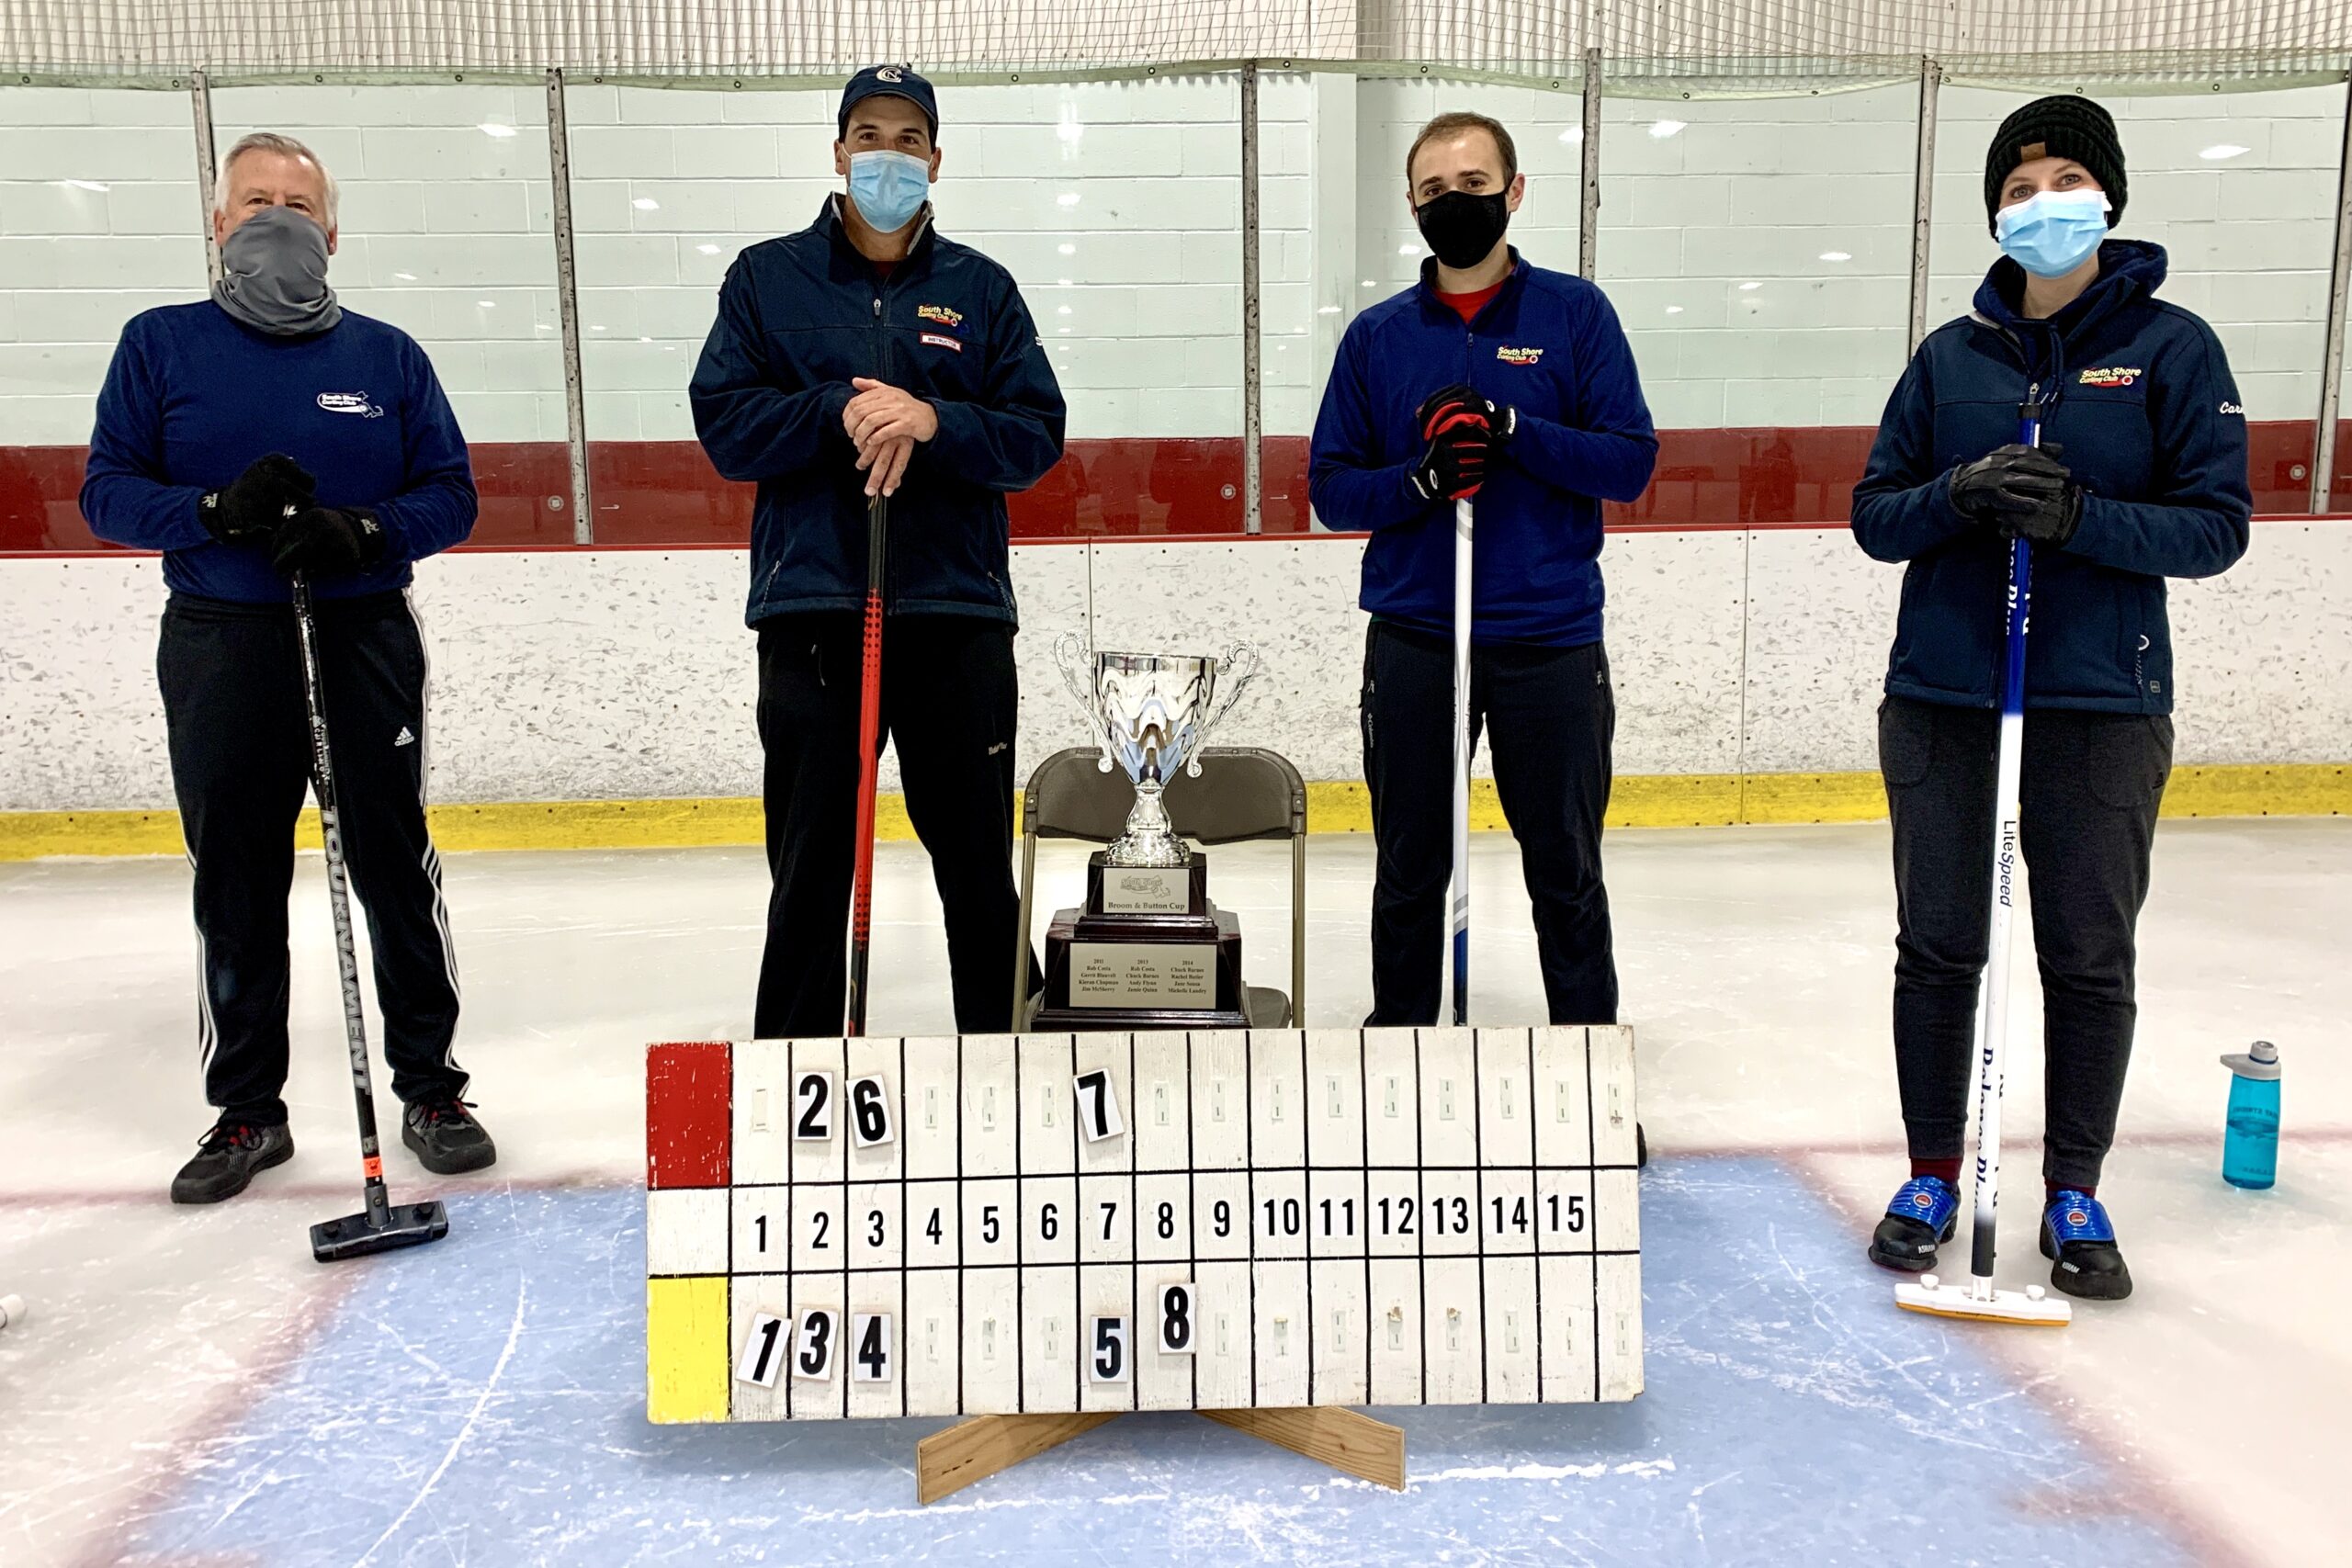 2020 Broom & Button Cup winners